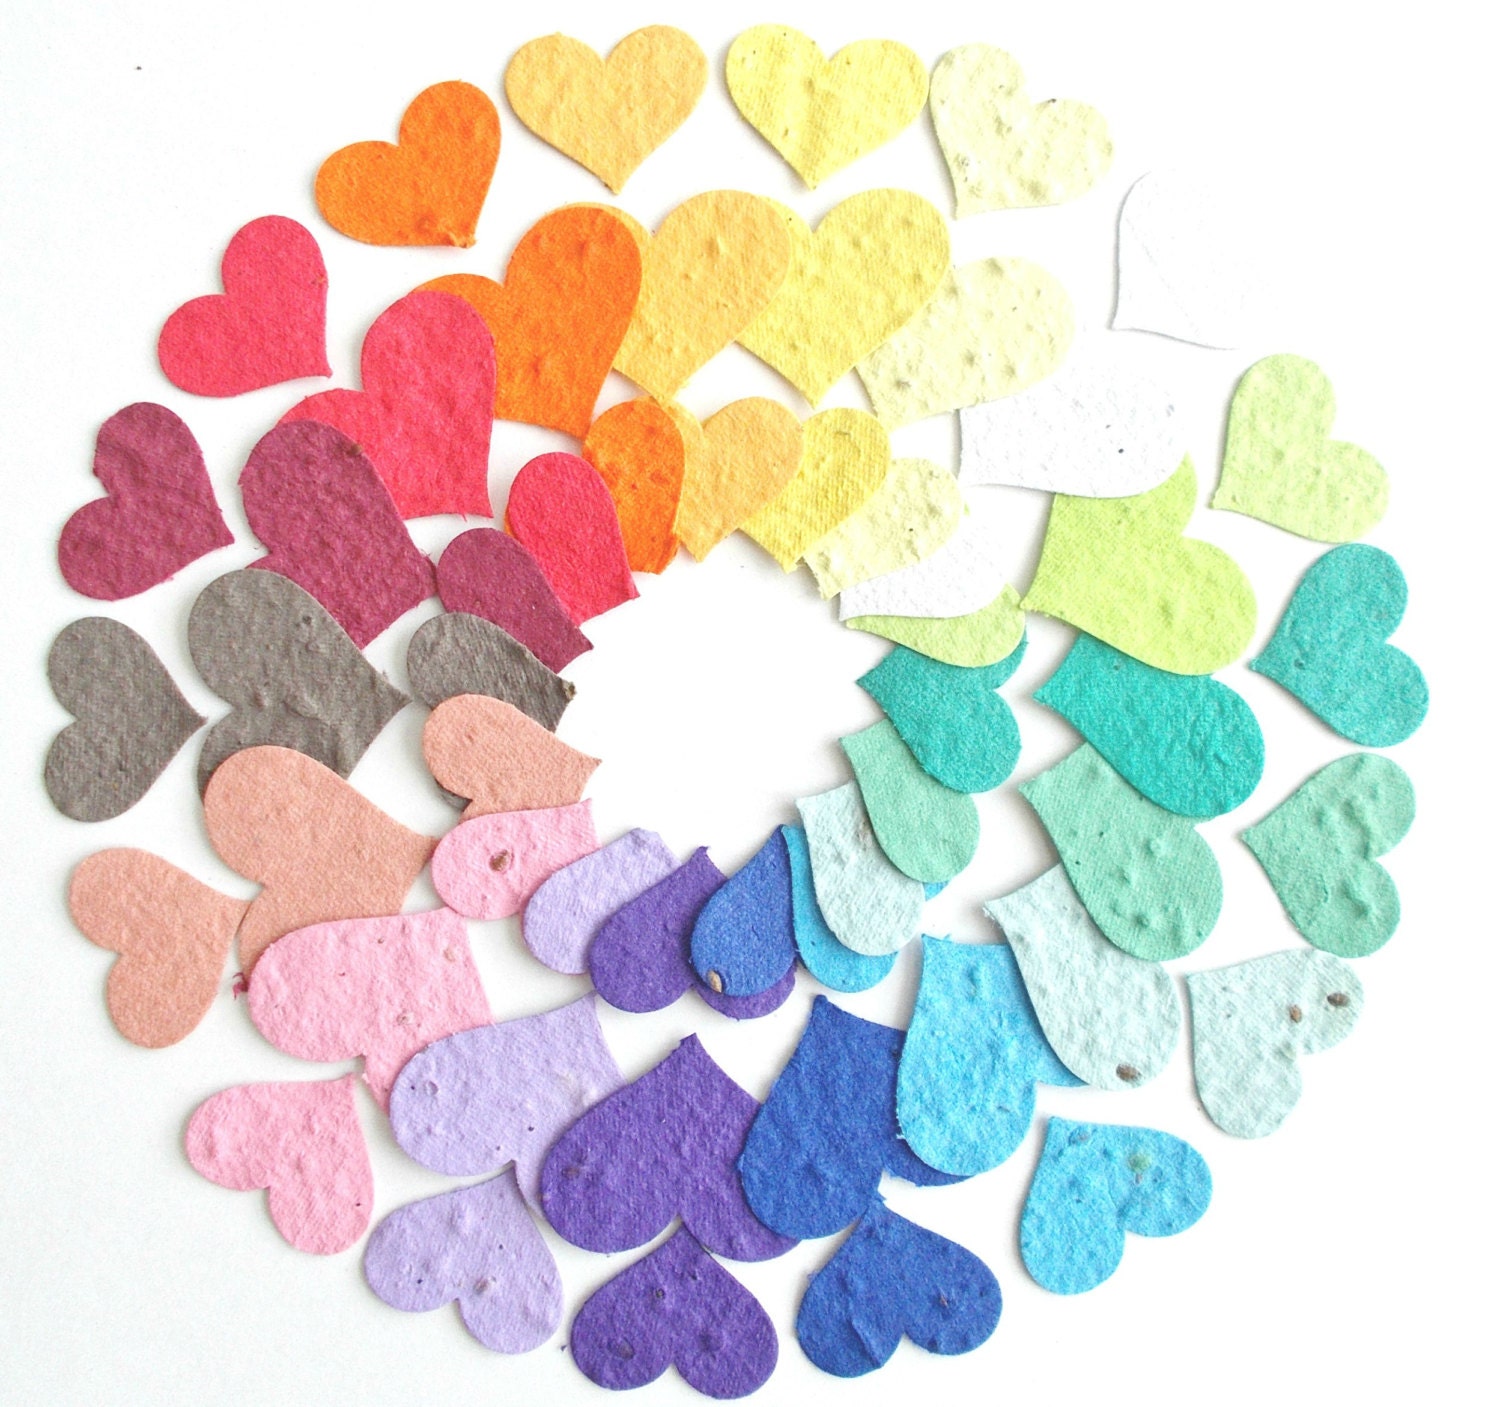 50 Large Plantable Paper Heart Confetti - Wedding, Shower and Party Decoration - Your Choice of Colors